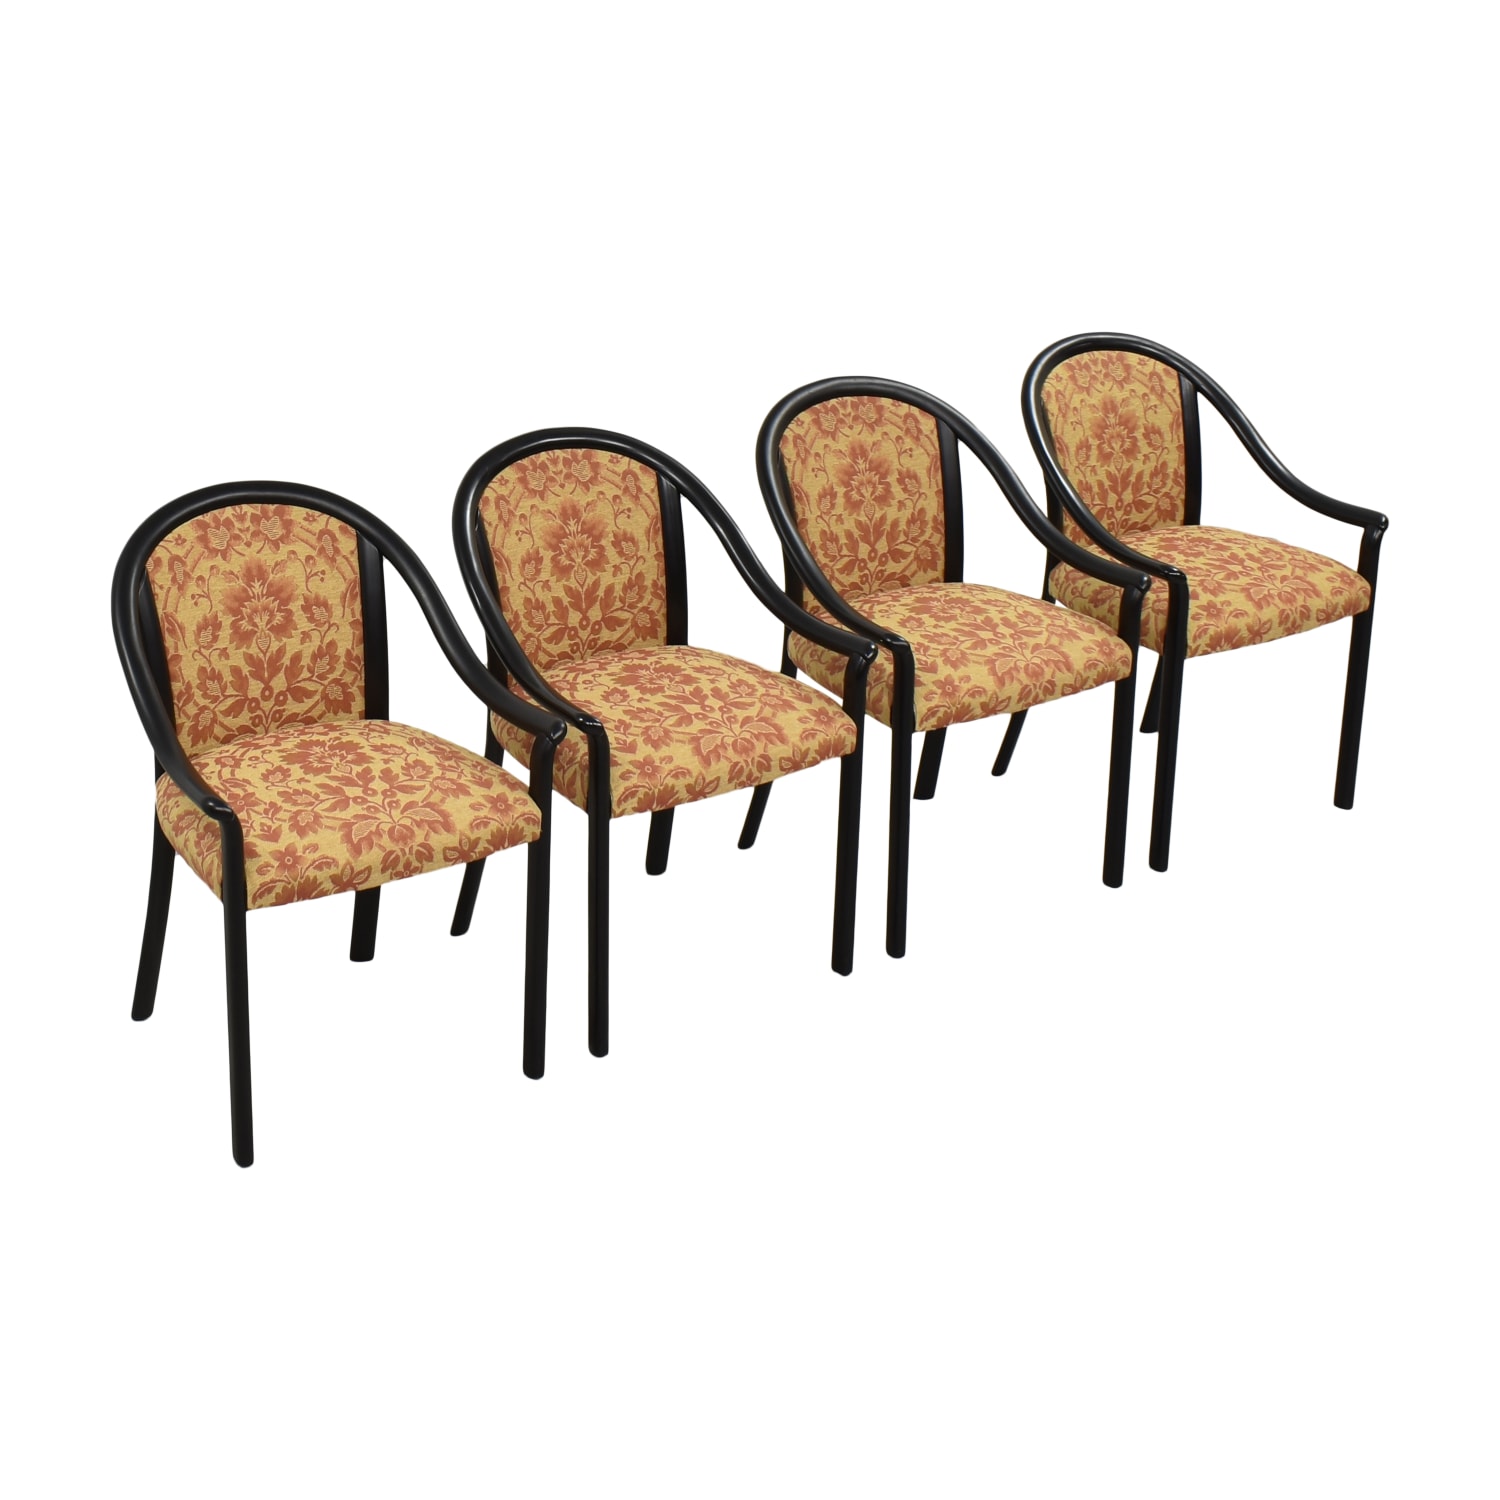  Modern Upholstered Dining Chairs dimensions